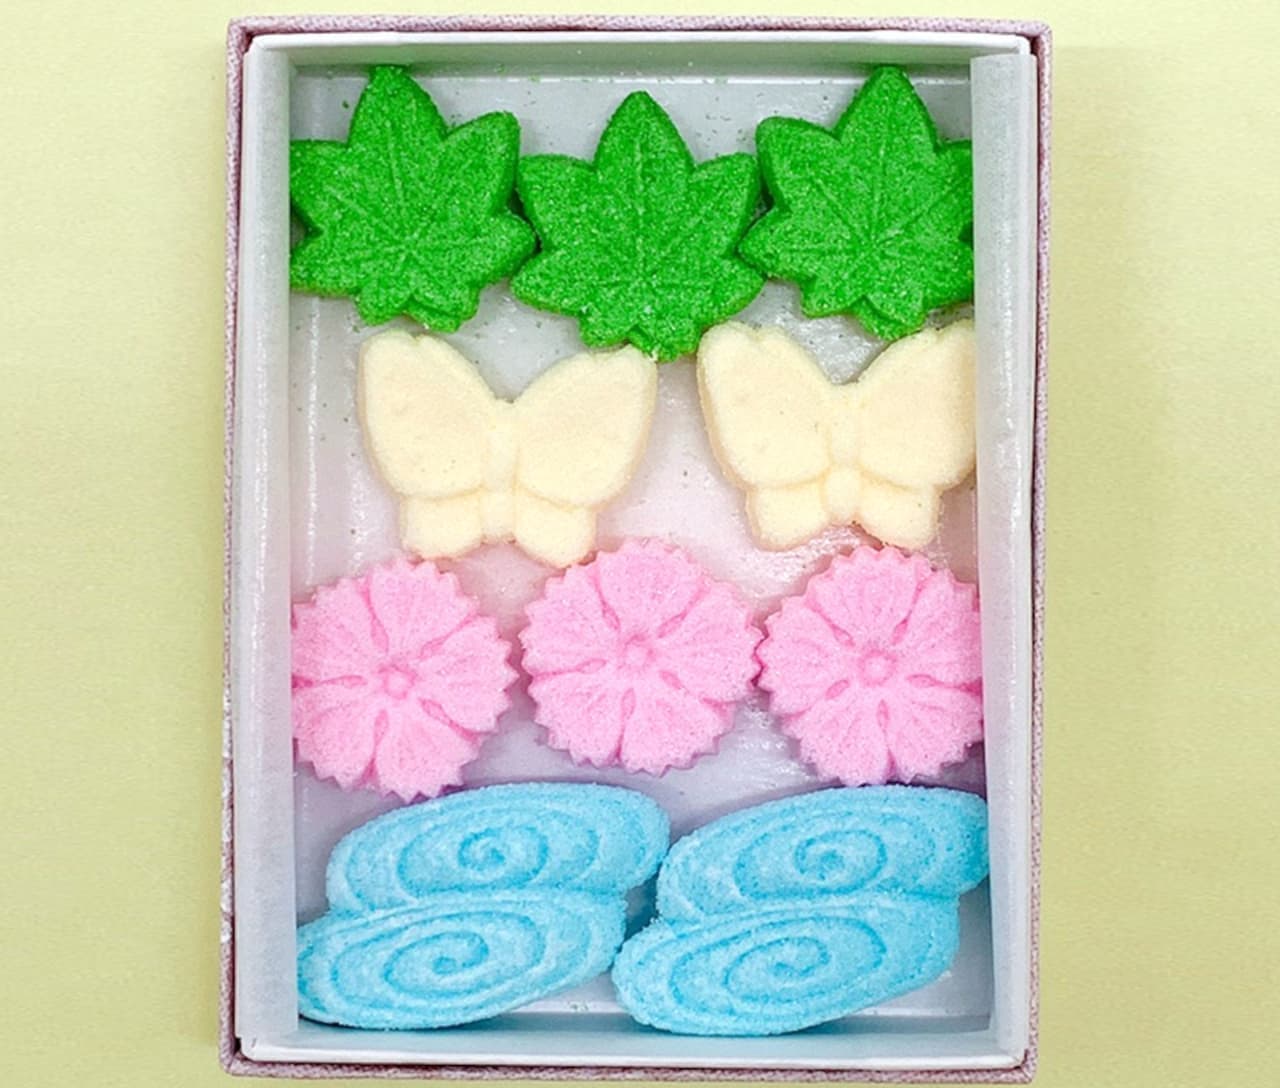 Assorted Japanese sweets from 12 companies "Kyoto Festival"